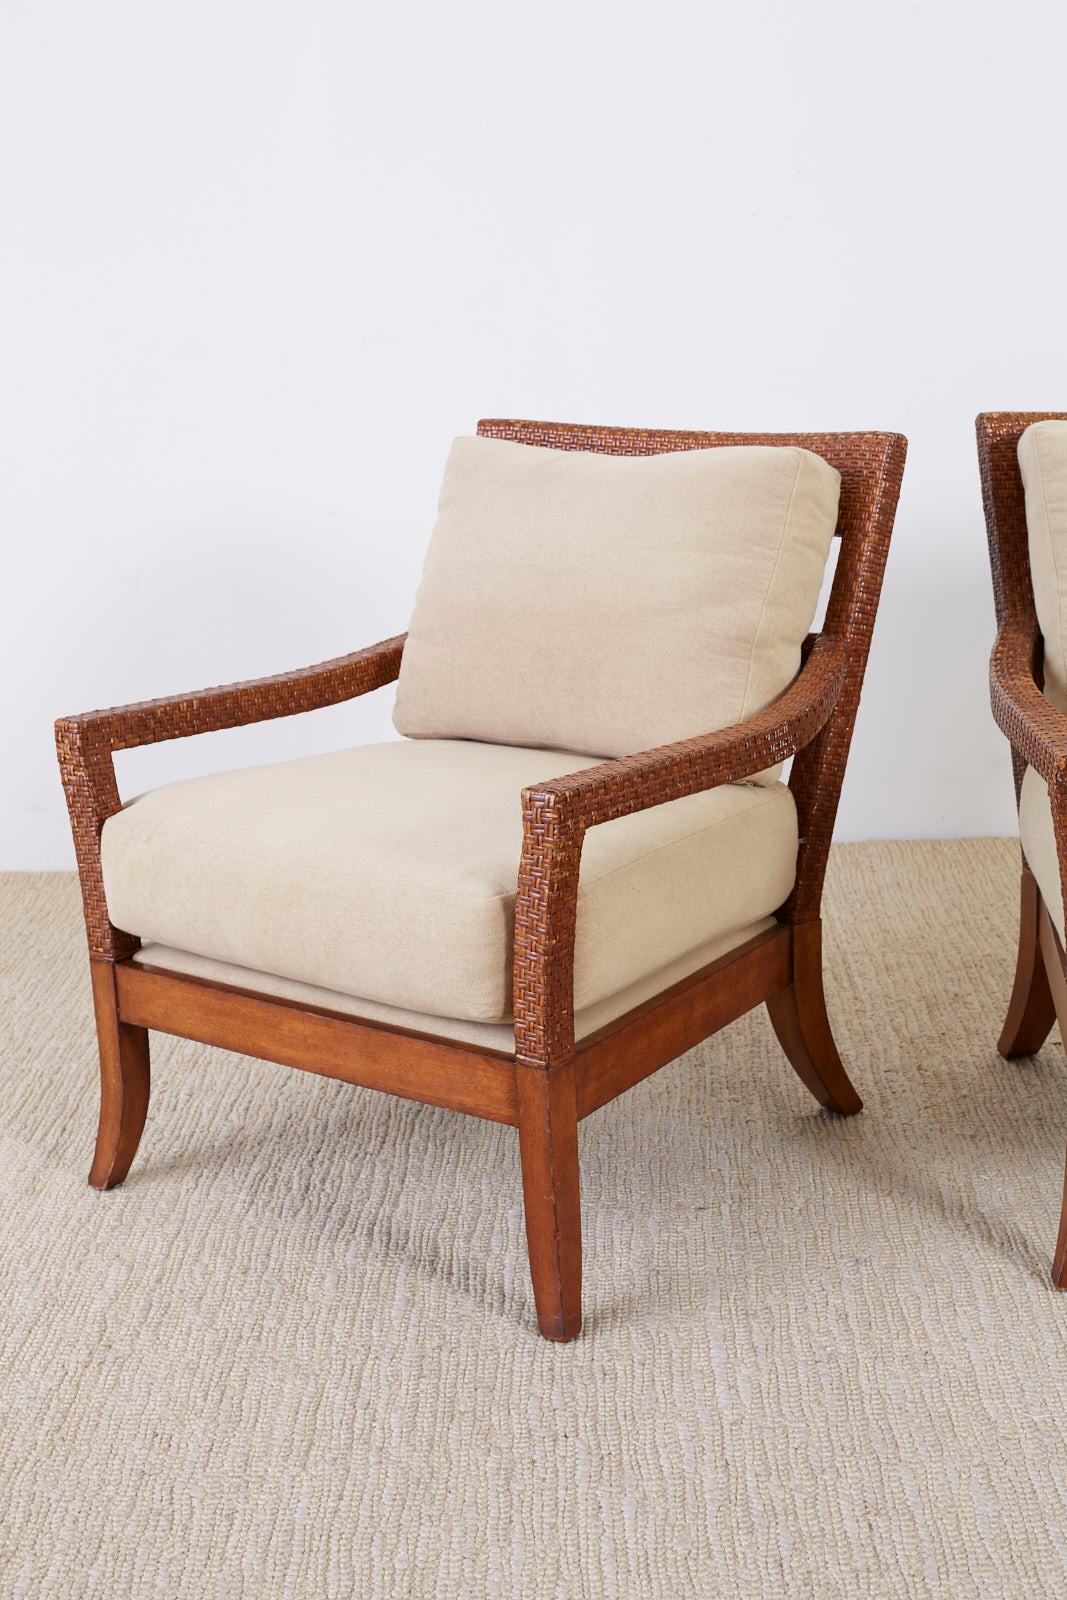 Pair of Billy Baldwin Style Rattan Wrapped Lounge Chairs 2